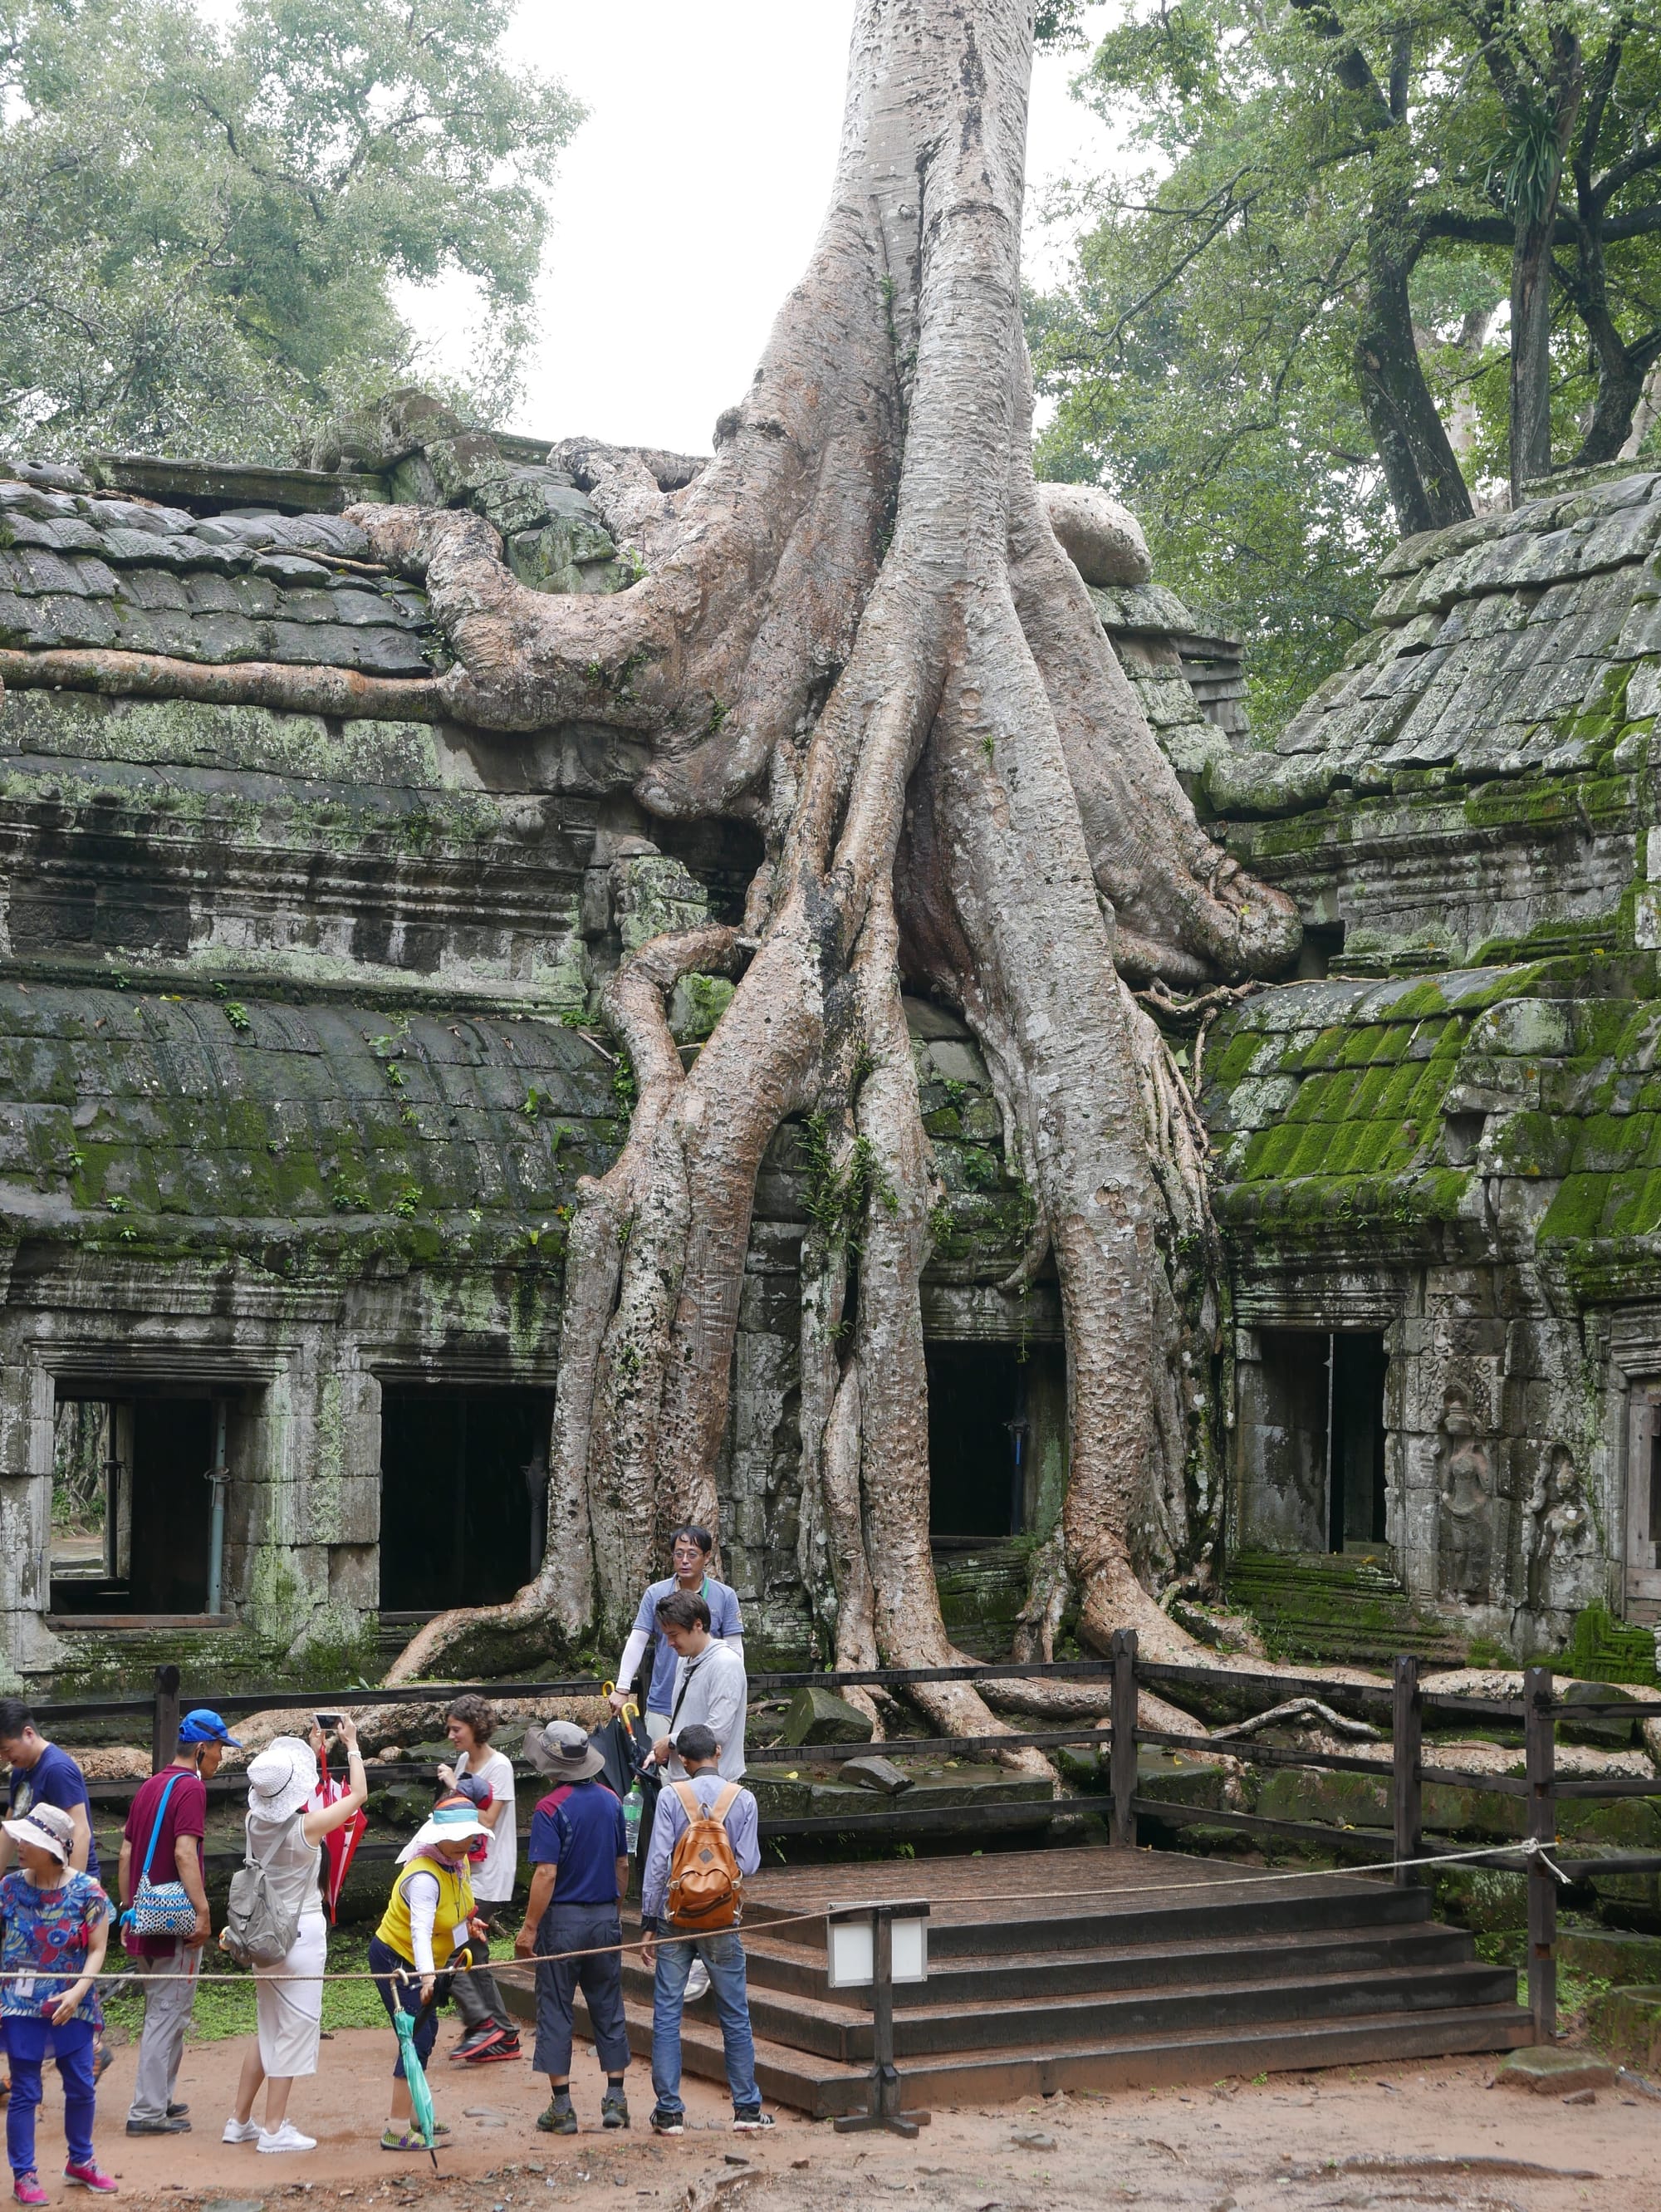 Photo by Author — how can a building survive this happening to it — Ta Prohm (ប្រាសាទតាព្រហ្ម), Angkor Archaeological Park, Angkor, Cambodia